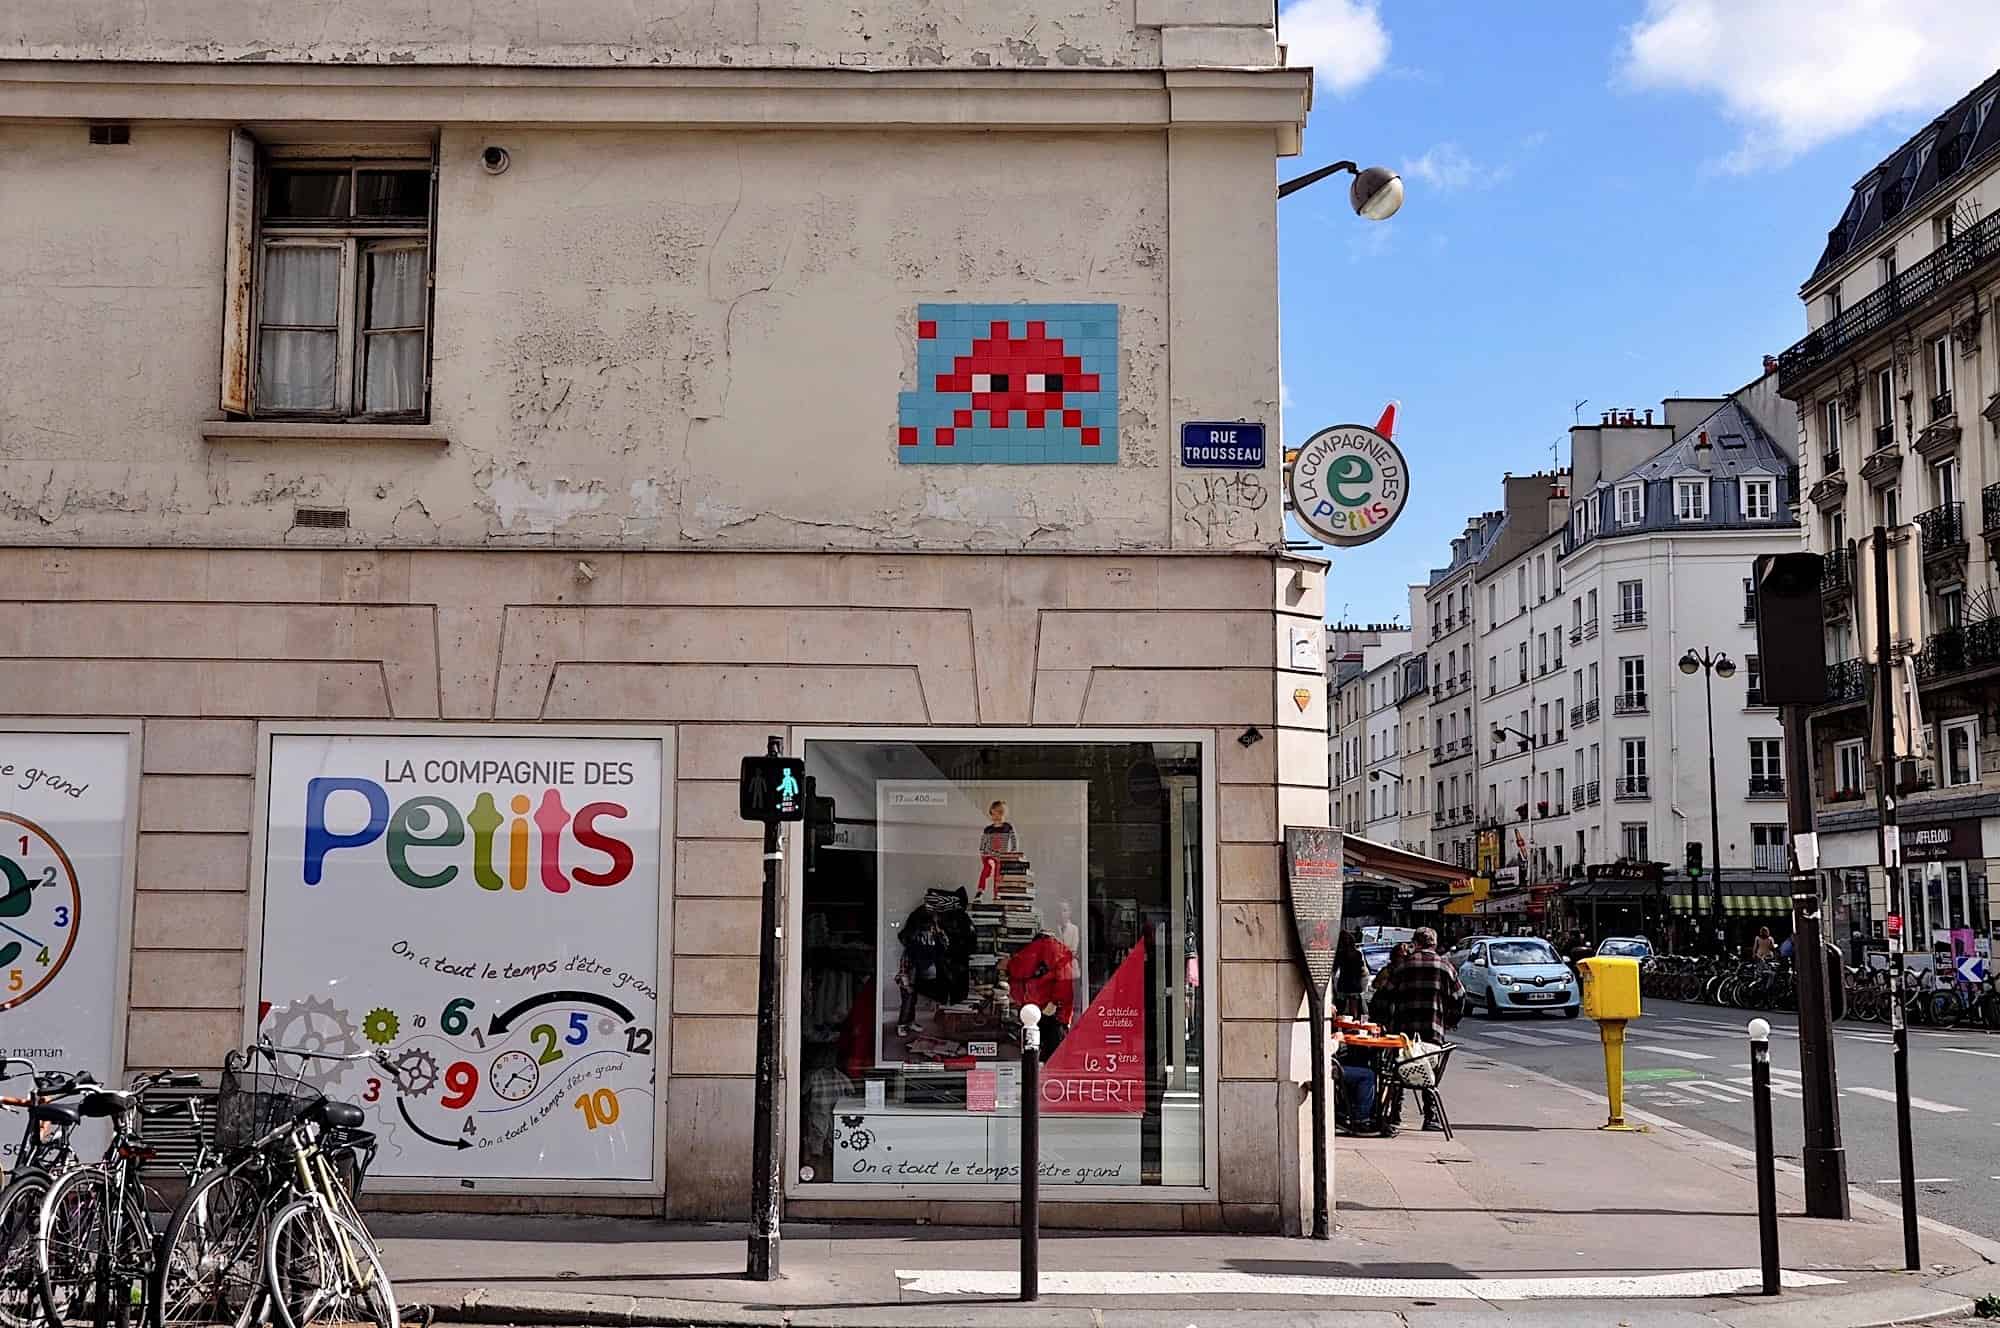 Invader street art is everywhere in Paris, so don't forget to look up.